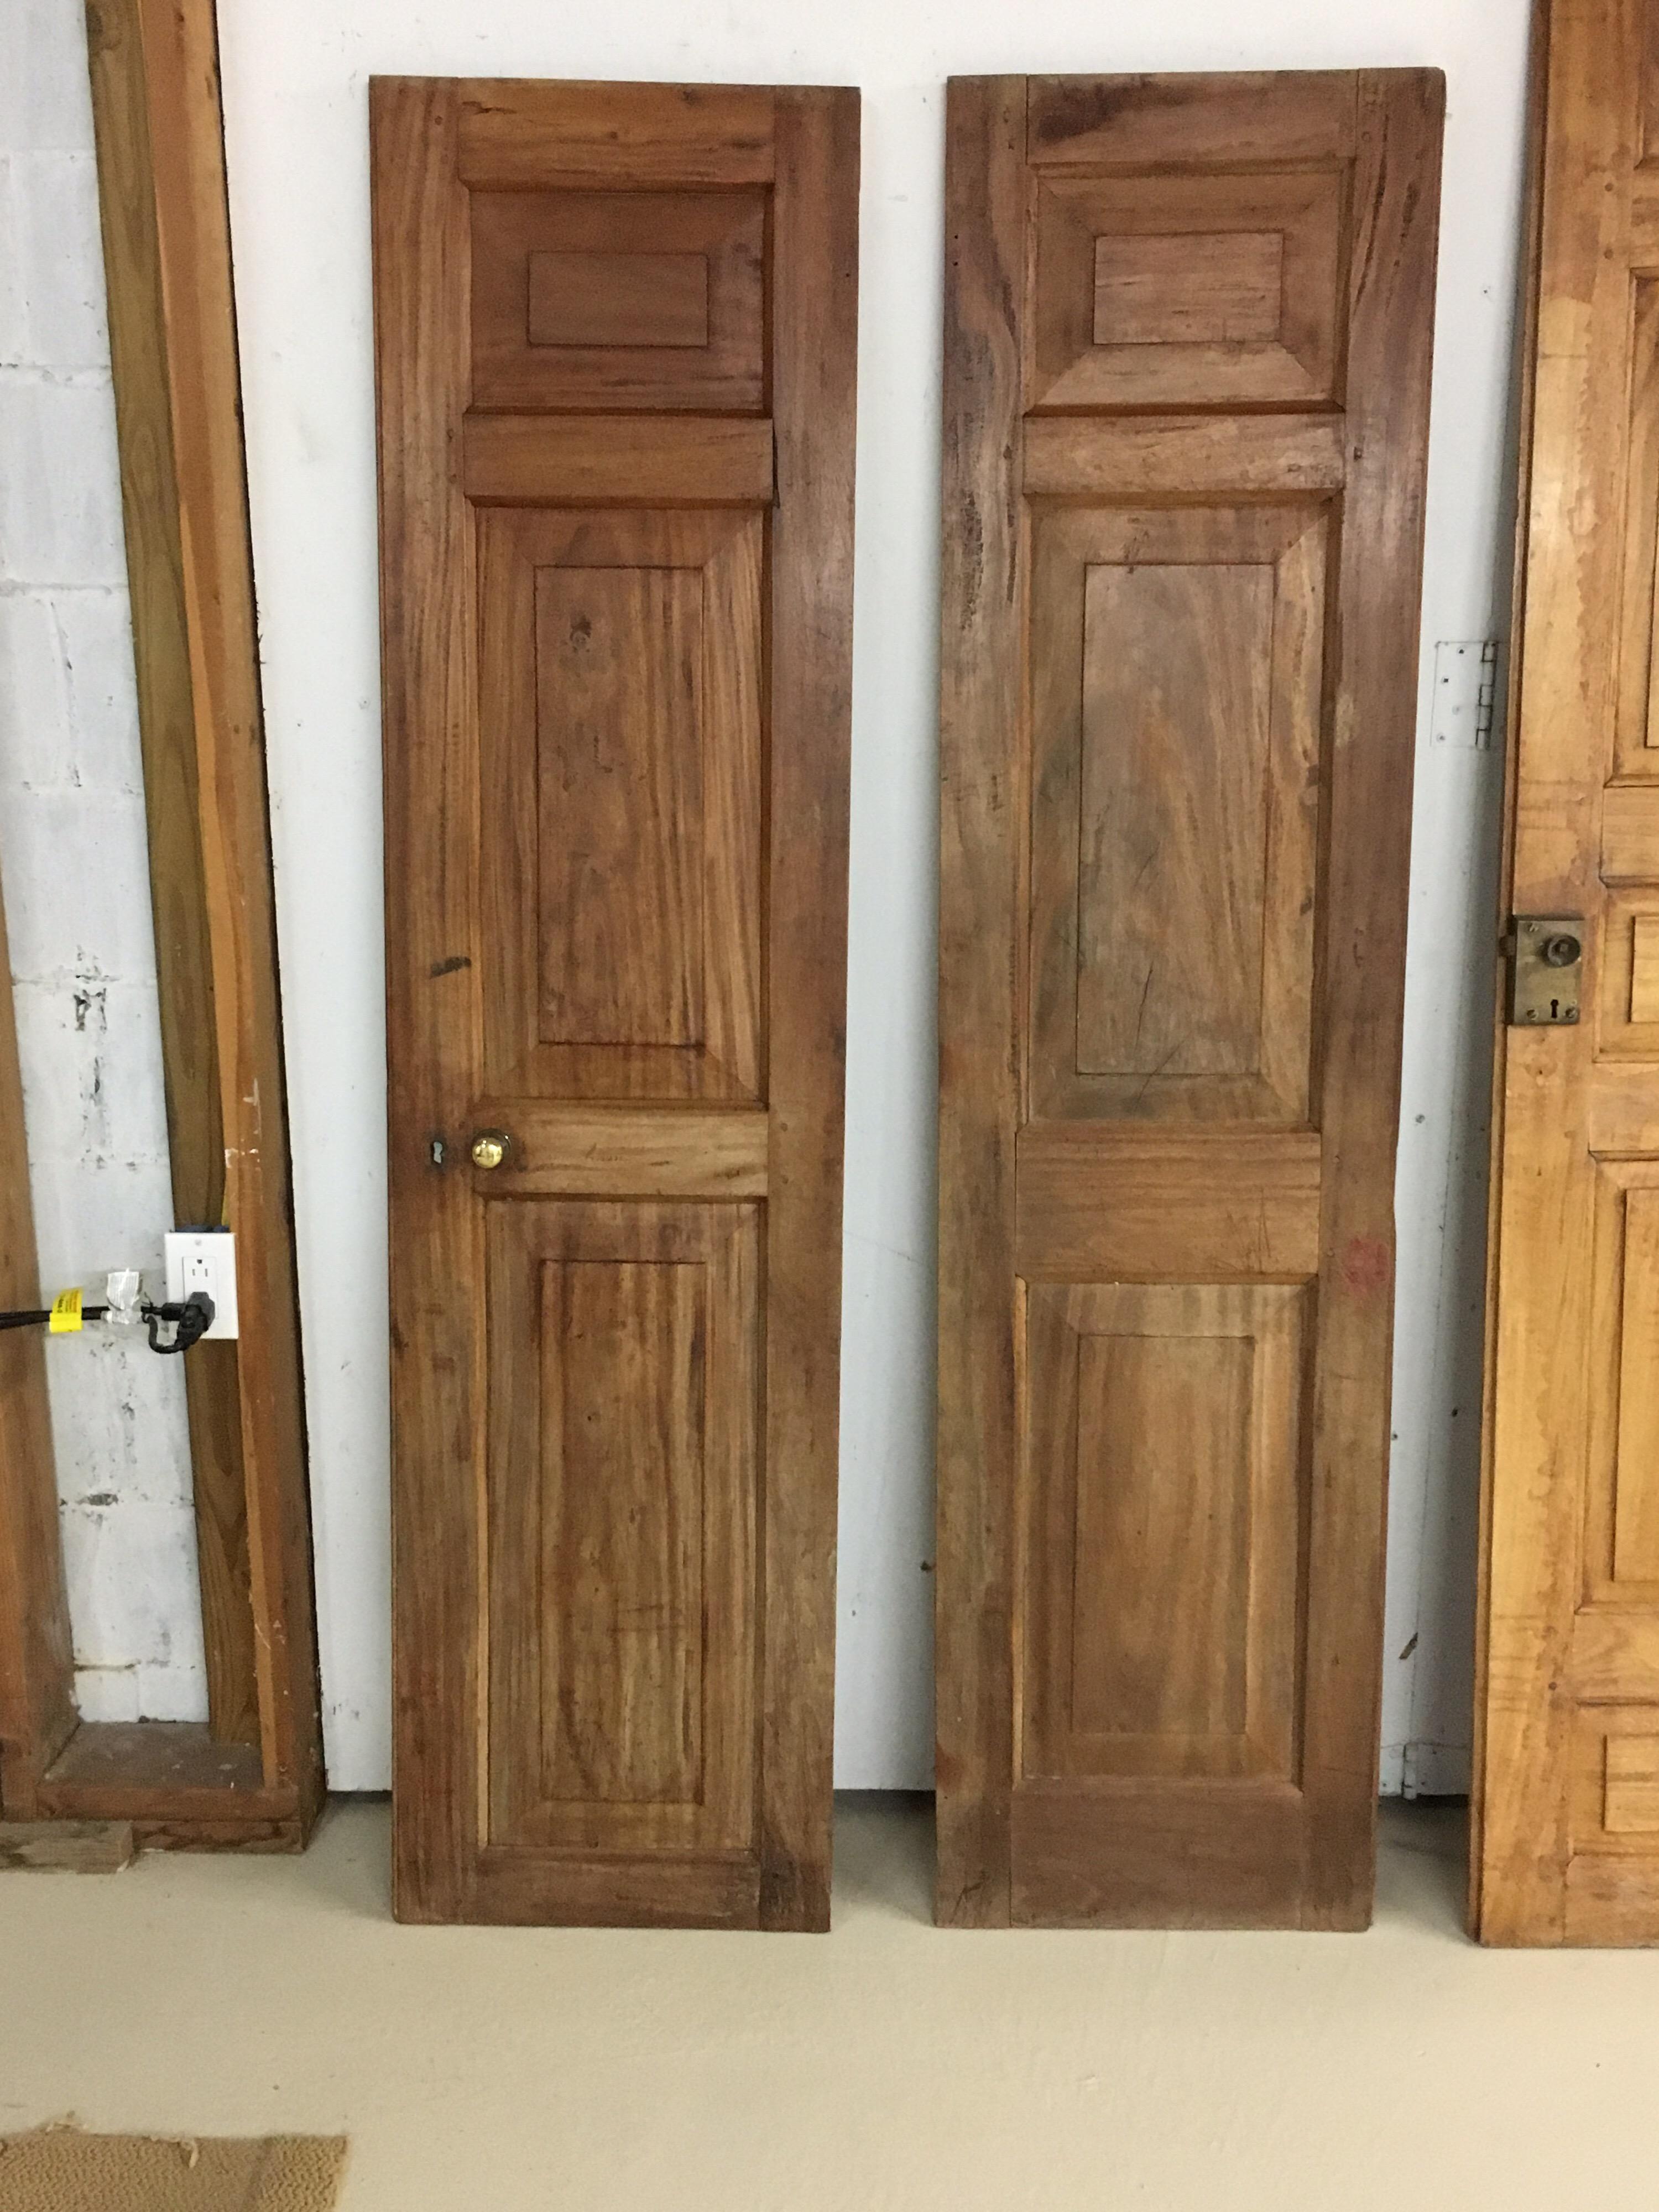 Pair of late 19th century Ceylonese solid satinwood paneled interior doors, circa 1890s. Beautiful door with old hardware but not original. Doors meet and join together. Solid satinwood and great patina from age and use.

Provenance: Harrington